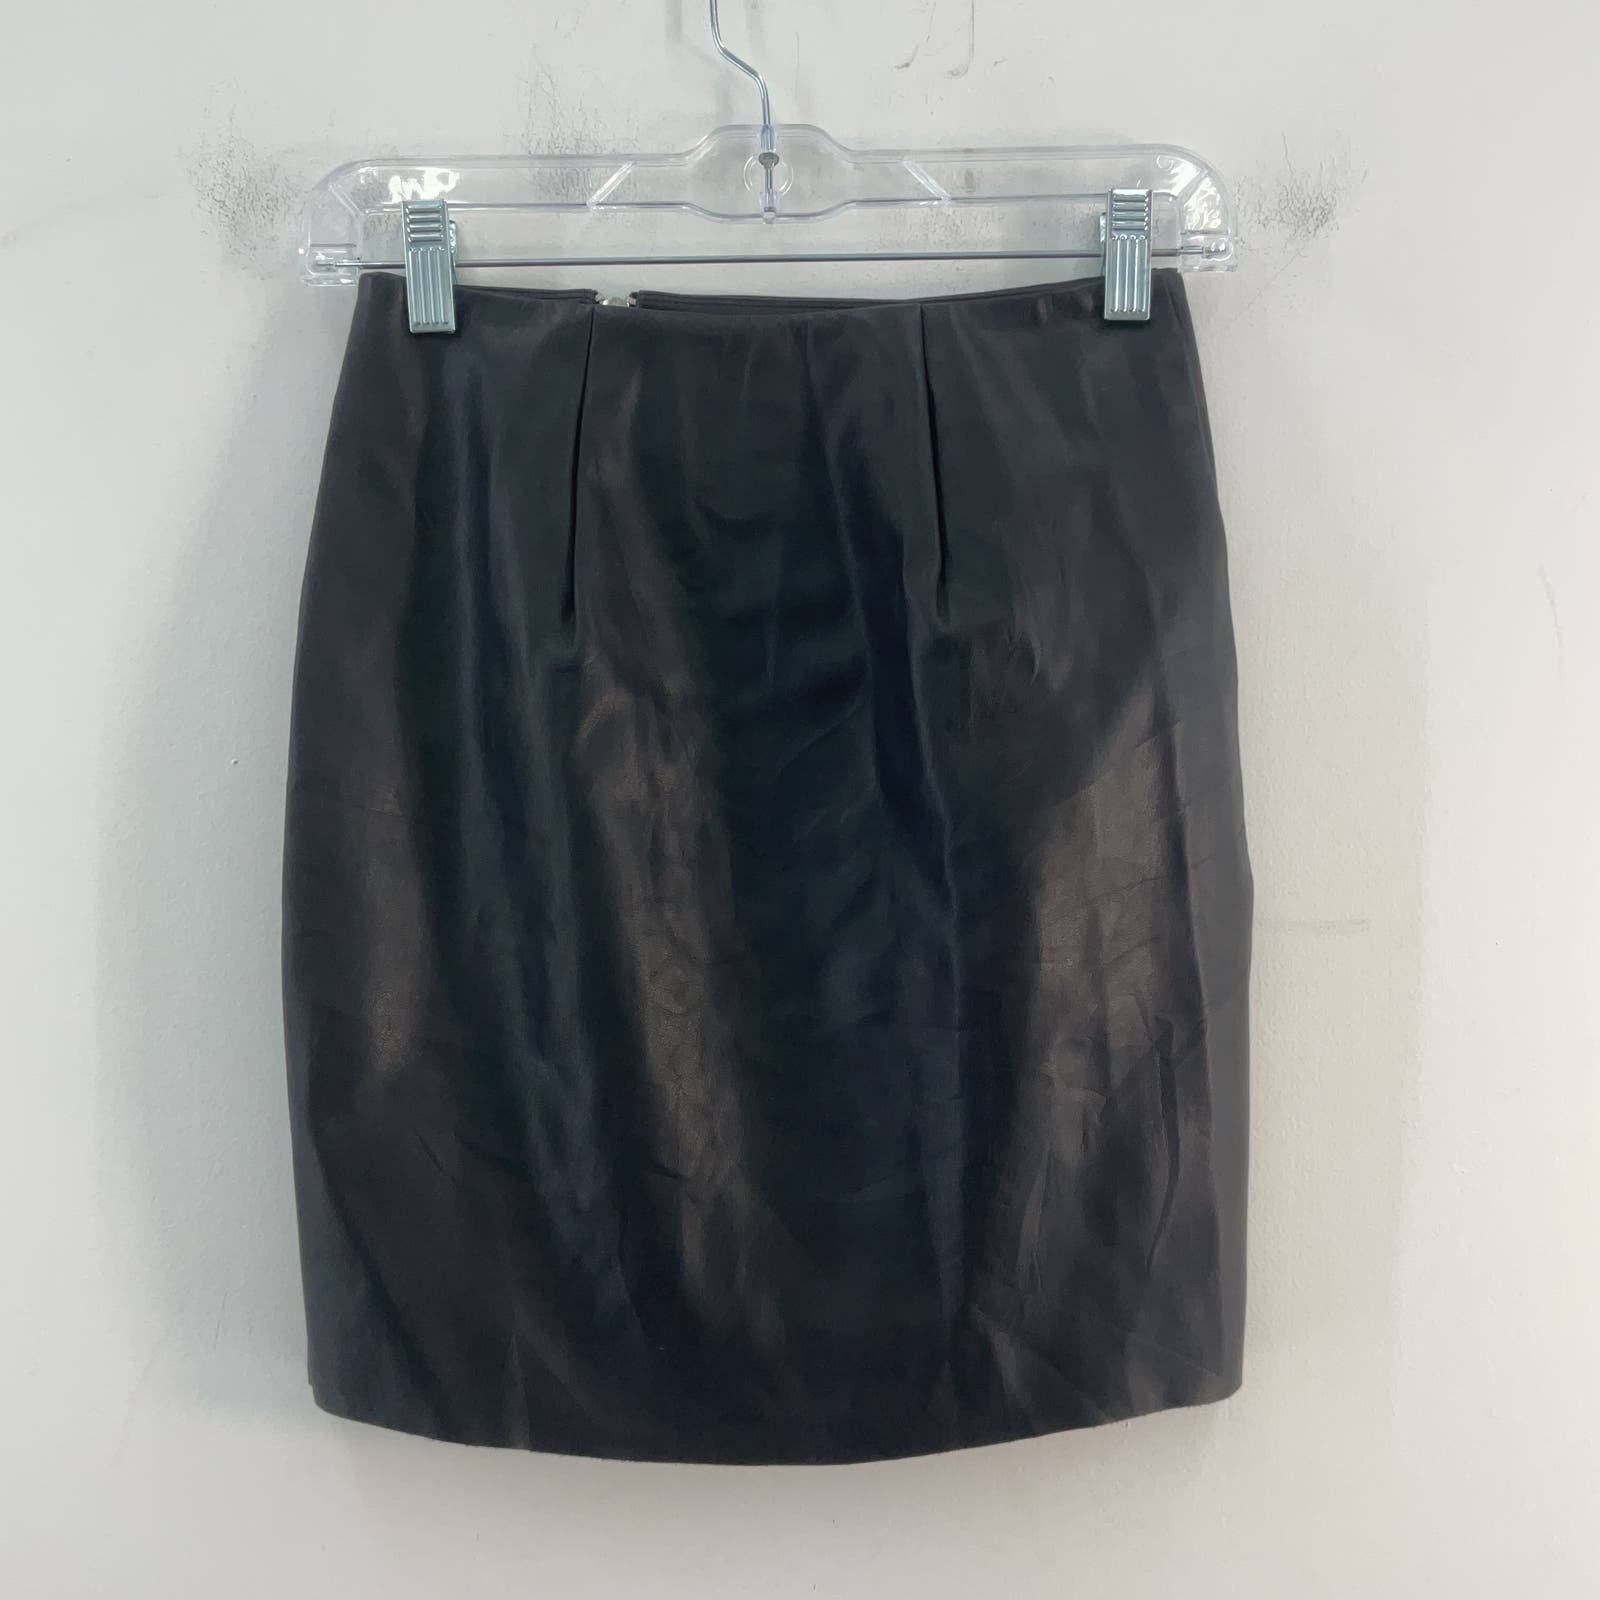 Great NWT Express Black Faux Leather Mini Skirt, Size 0